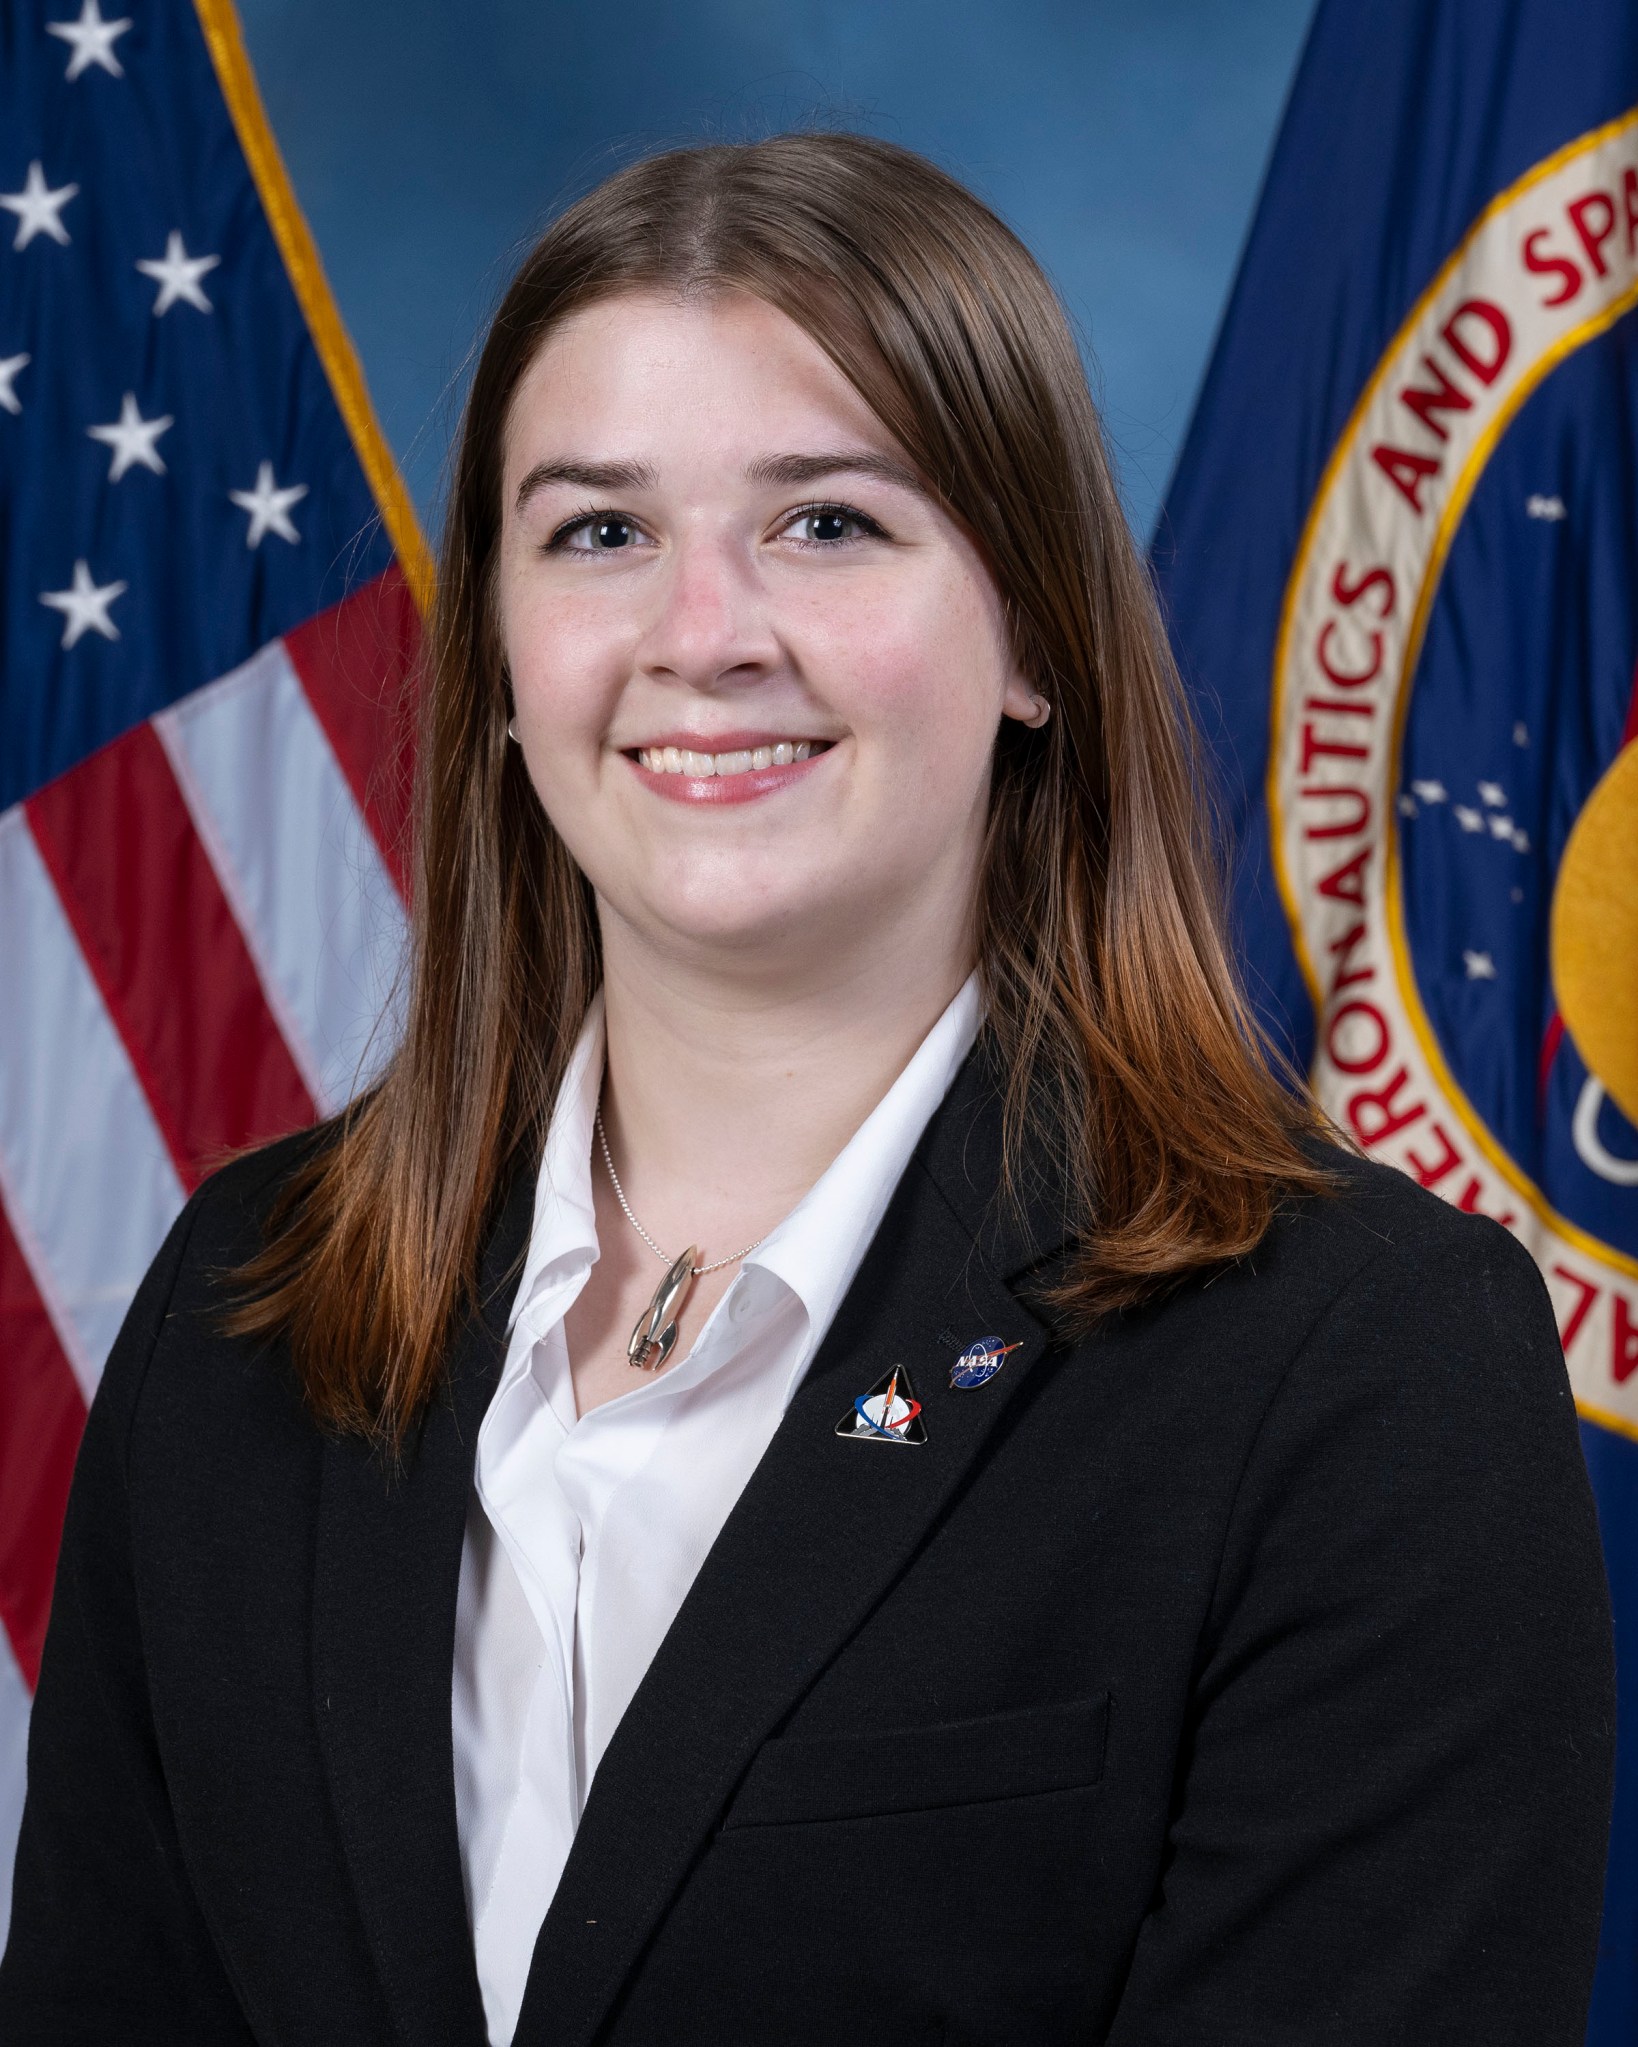 A woman with brown shoulder-length hair poses in front of the American and NASA flags for her headshot.